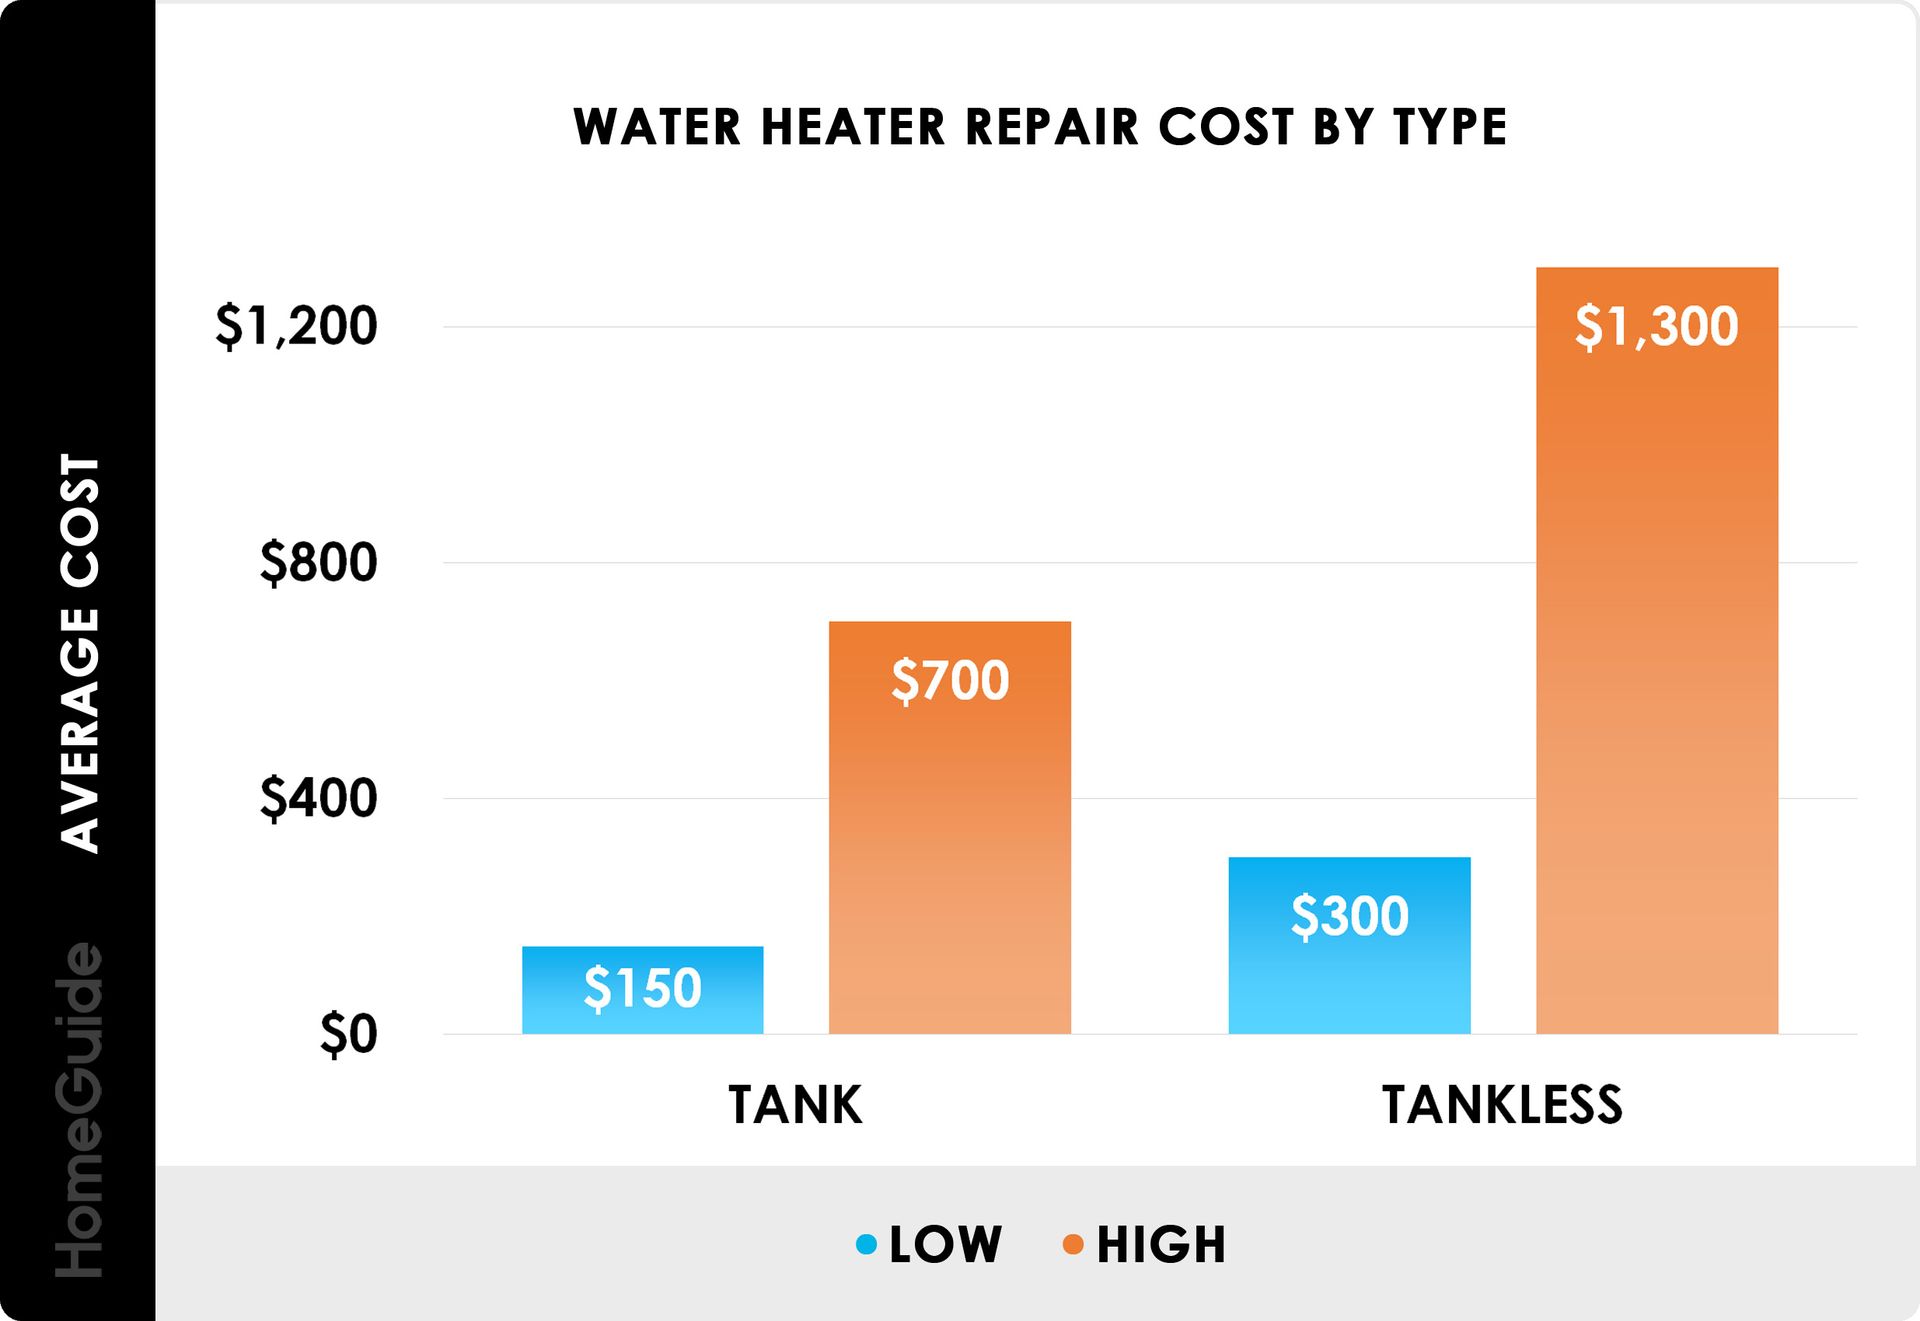 How to Repair a Tankless Water Heater

